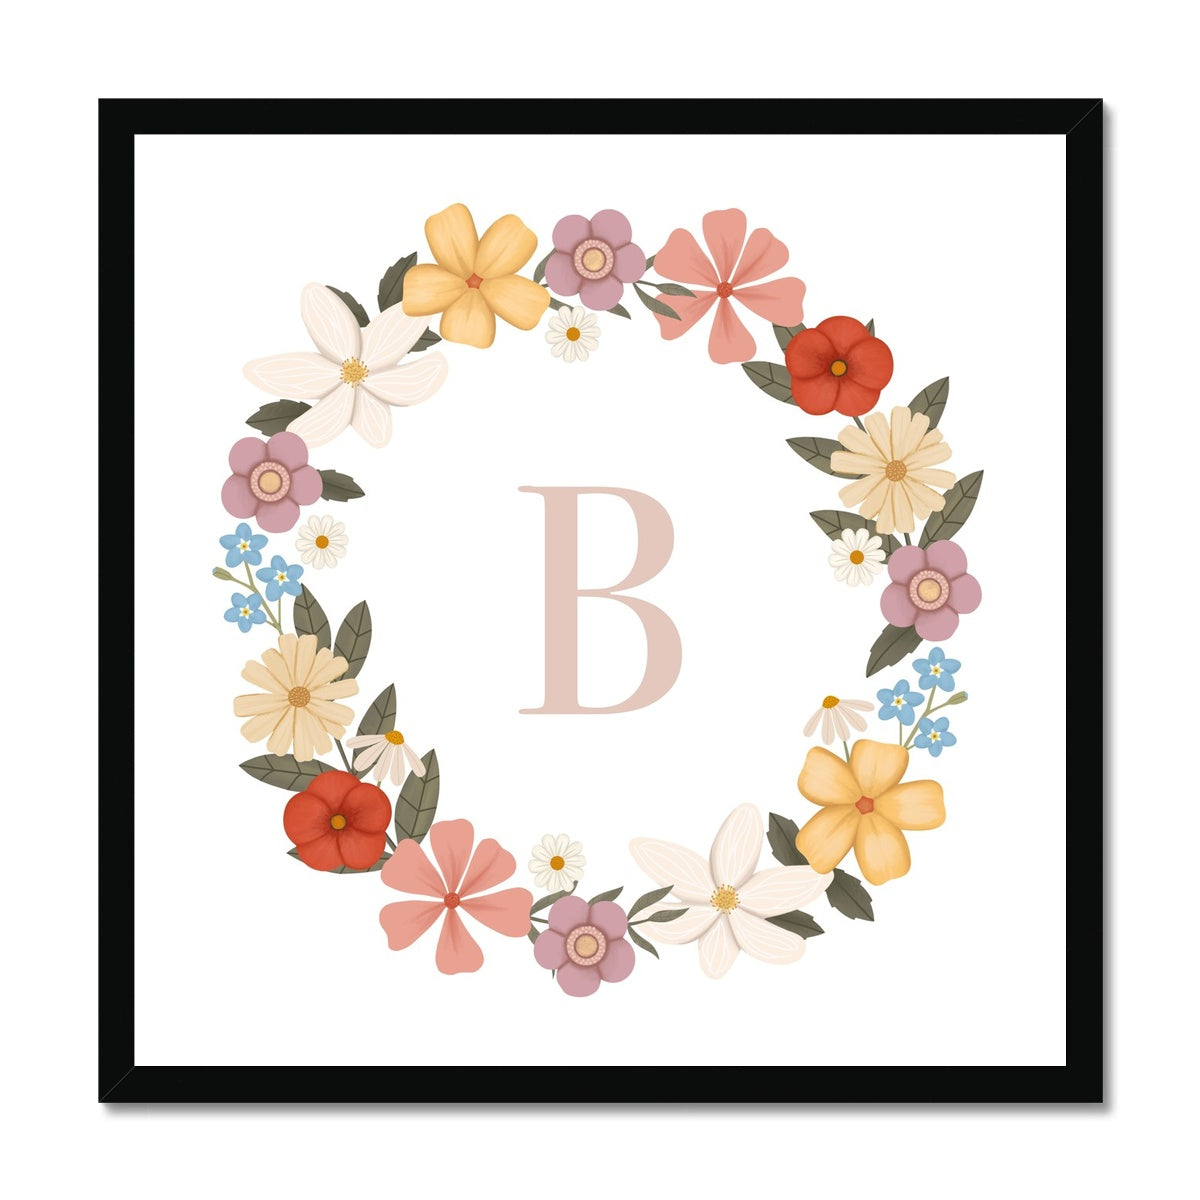 Personalised Floral Wreath in white / Framed Print